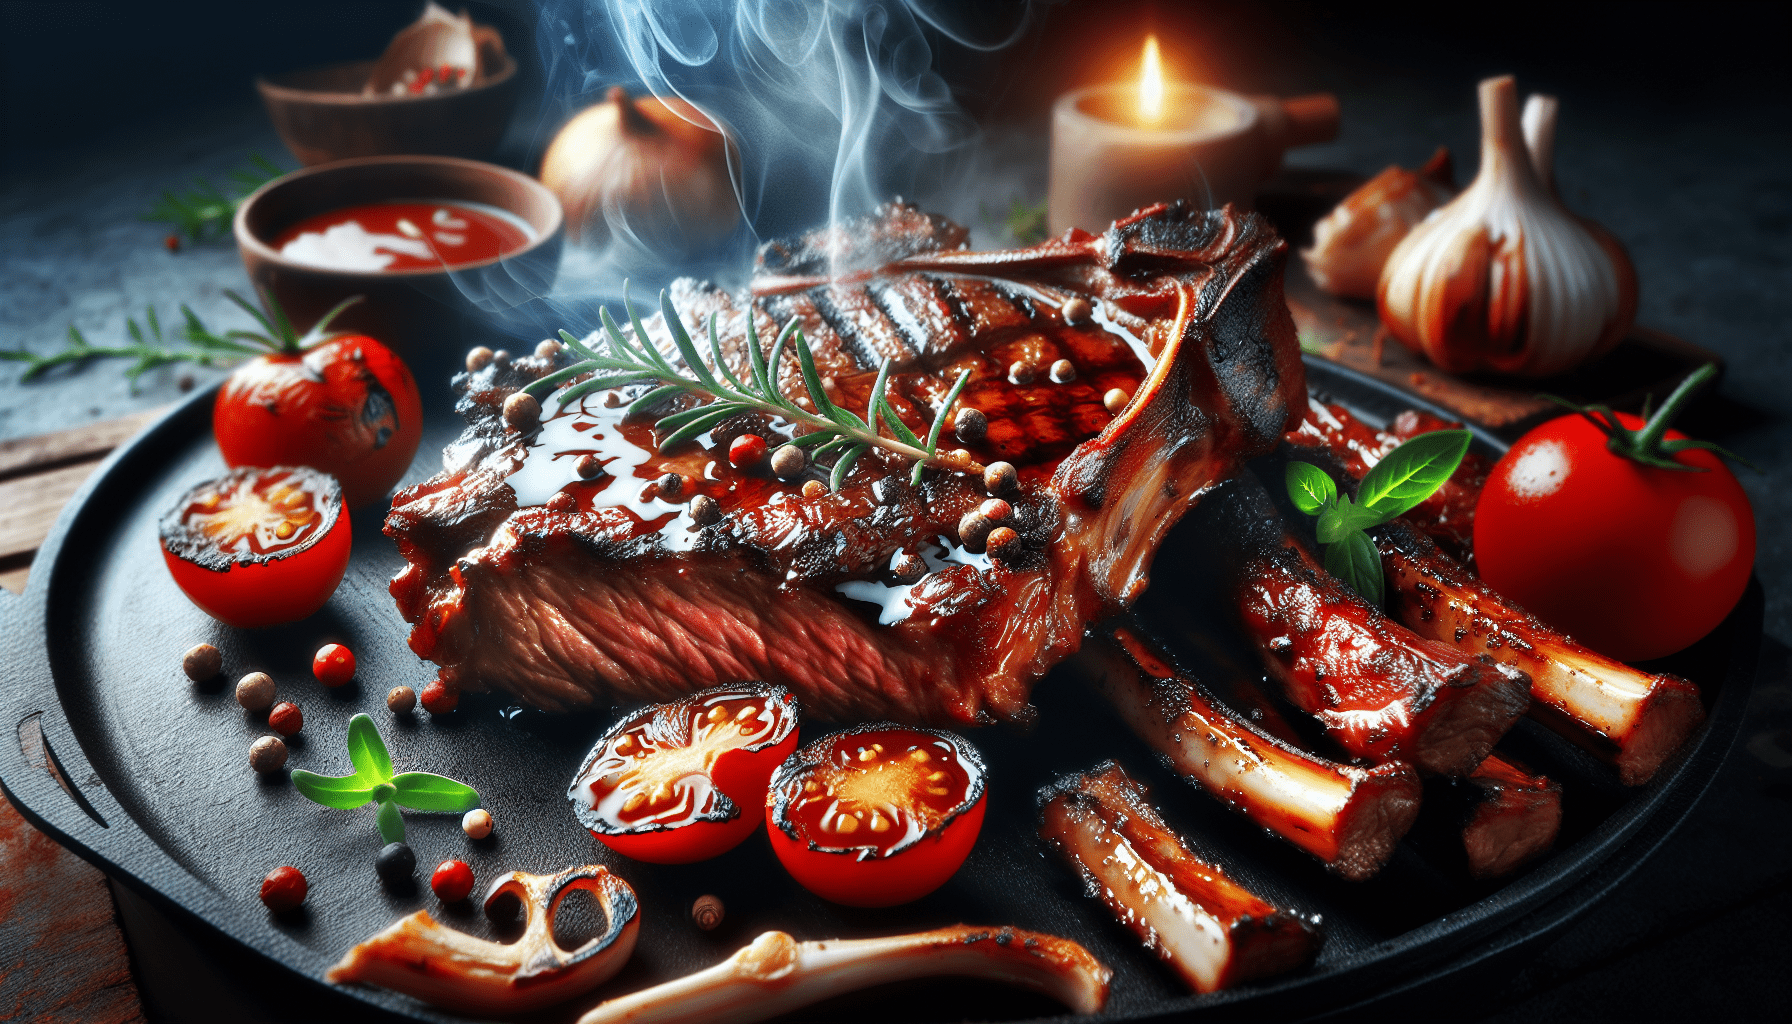 Delicious Grilled Meat Recipes for a Flavorful Carnivore Diet this Summer